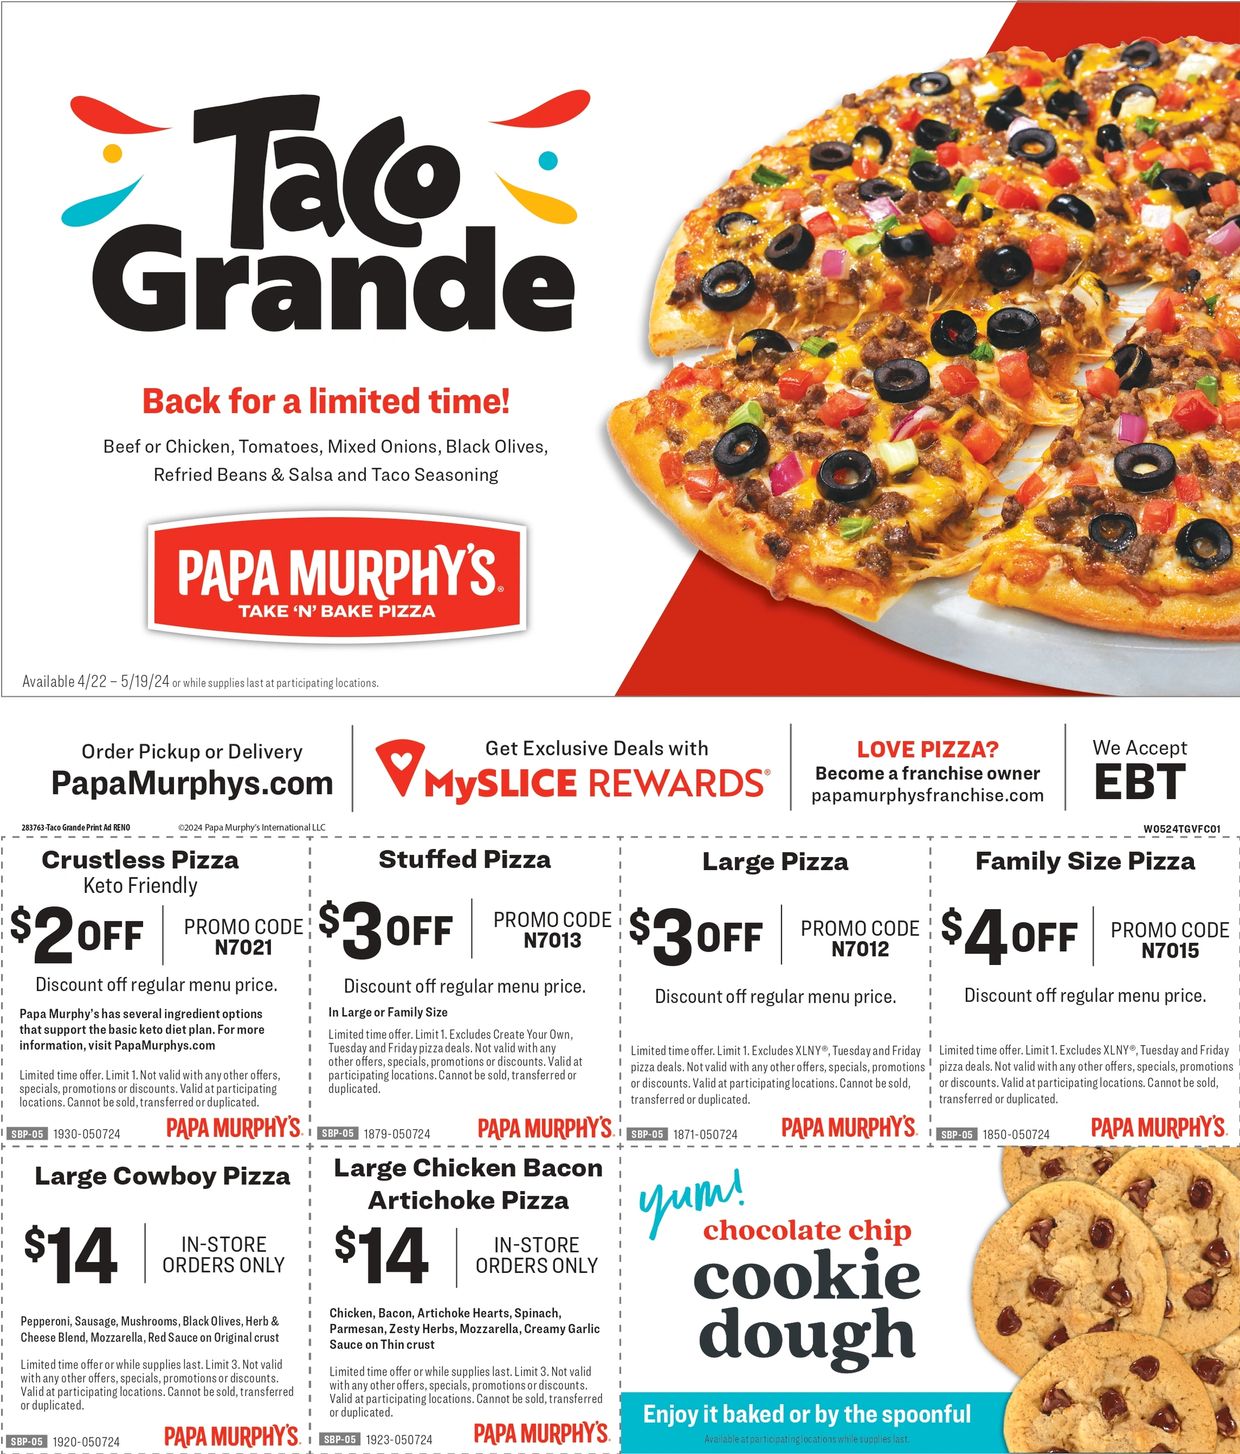 Taco Grande Back for a Limited Time!
Order Now!
At Papa Murphy's!